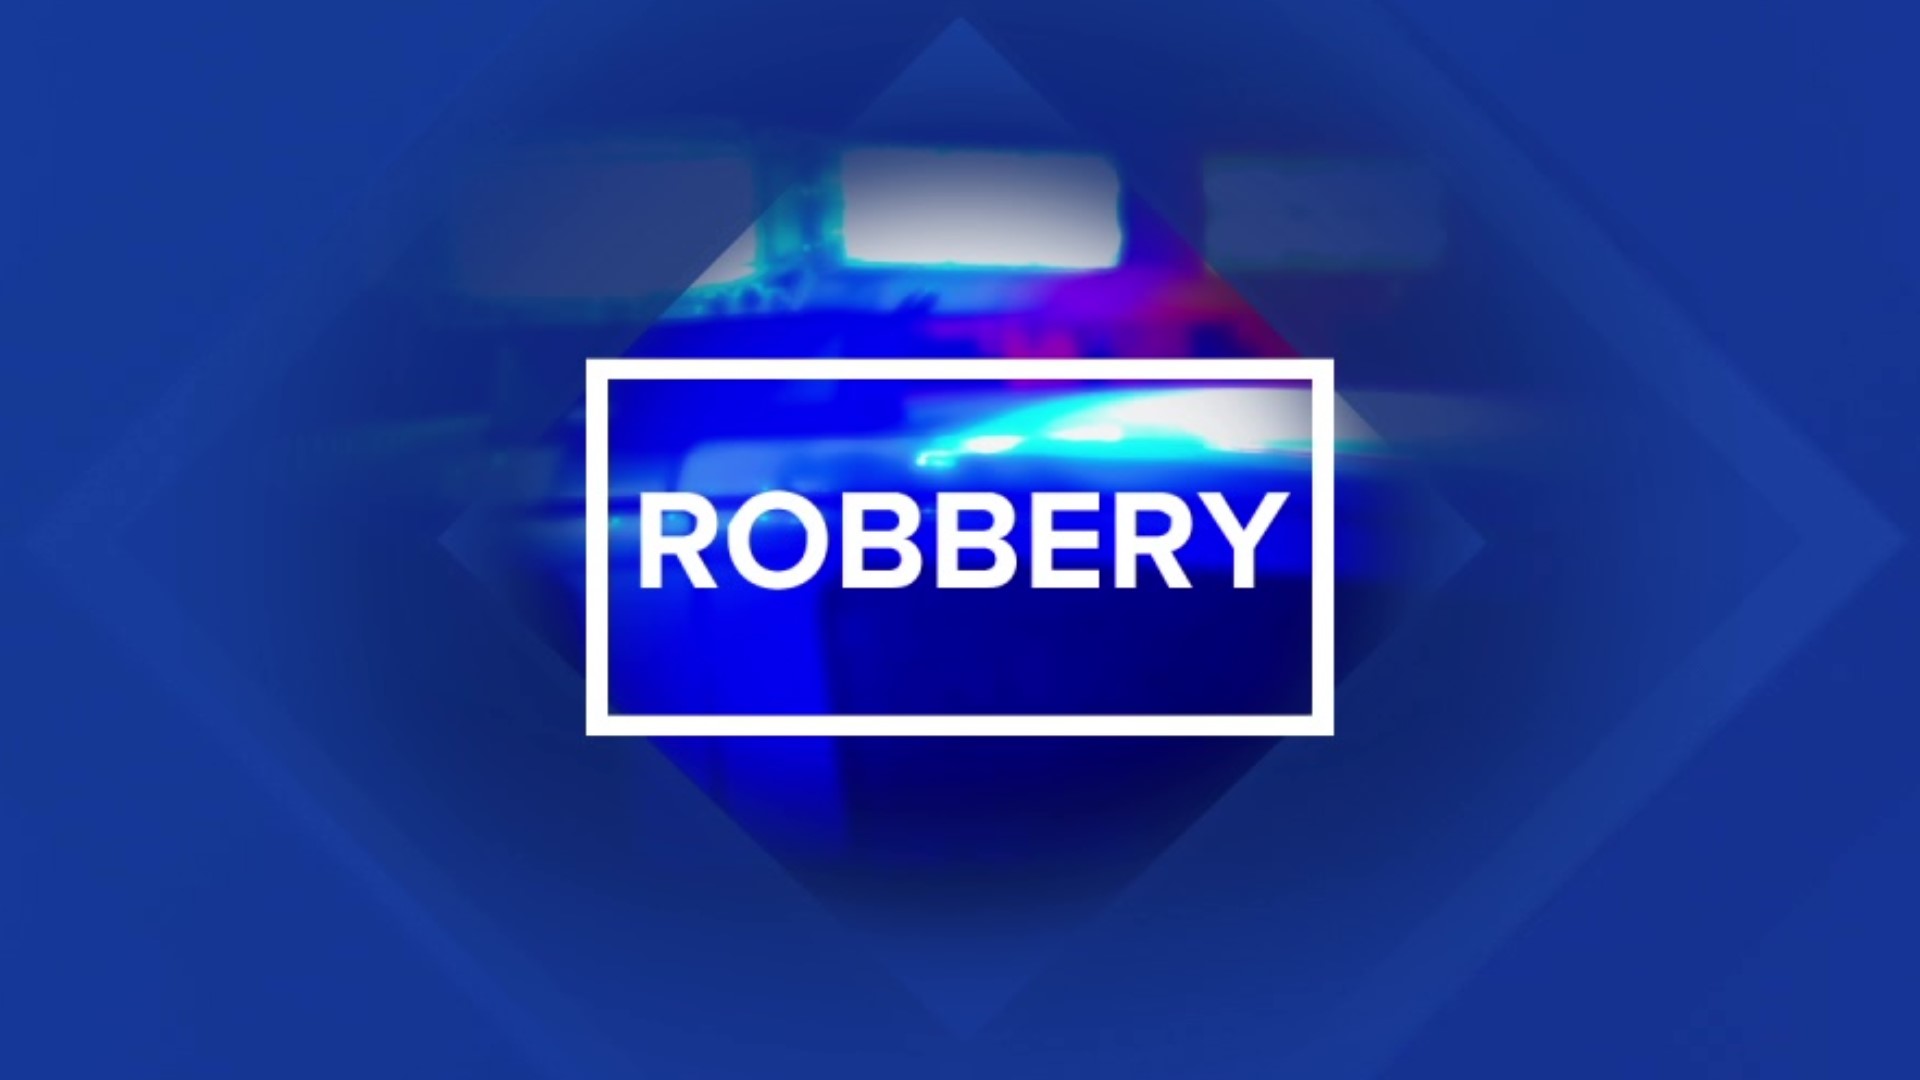 The robbery happened just after 3:00 p.m. on Friday.